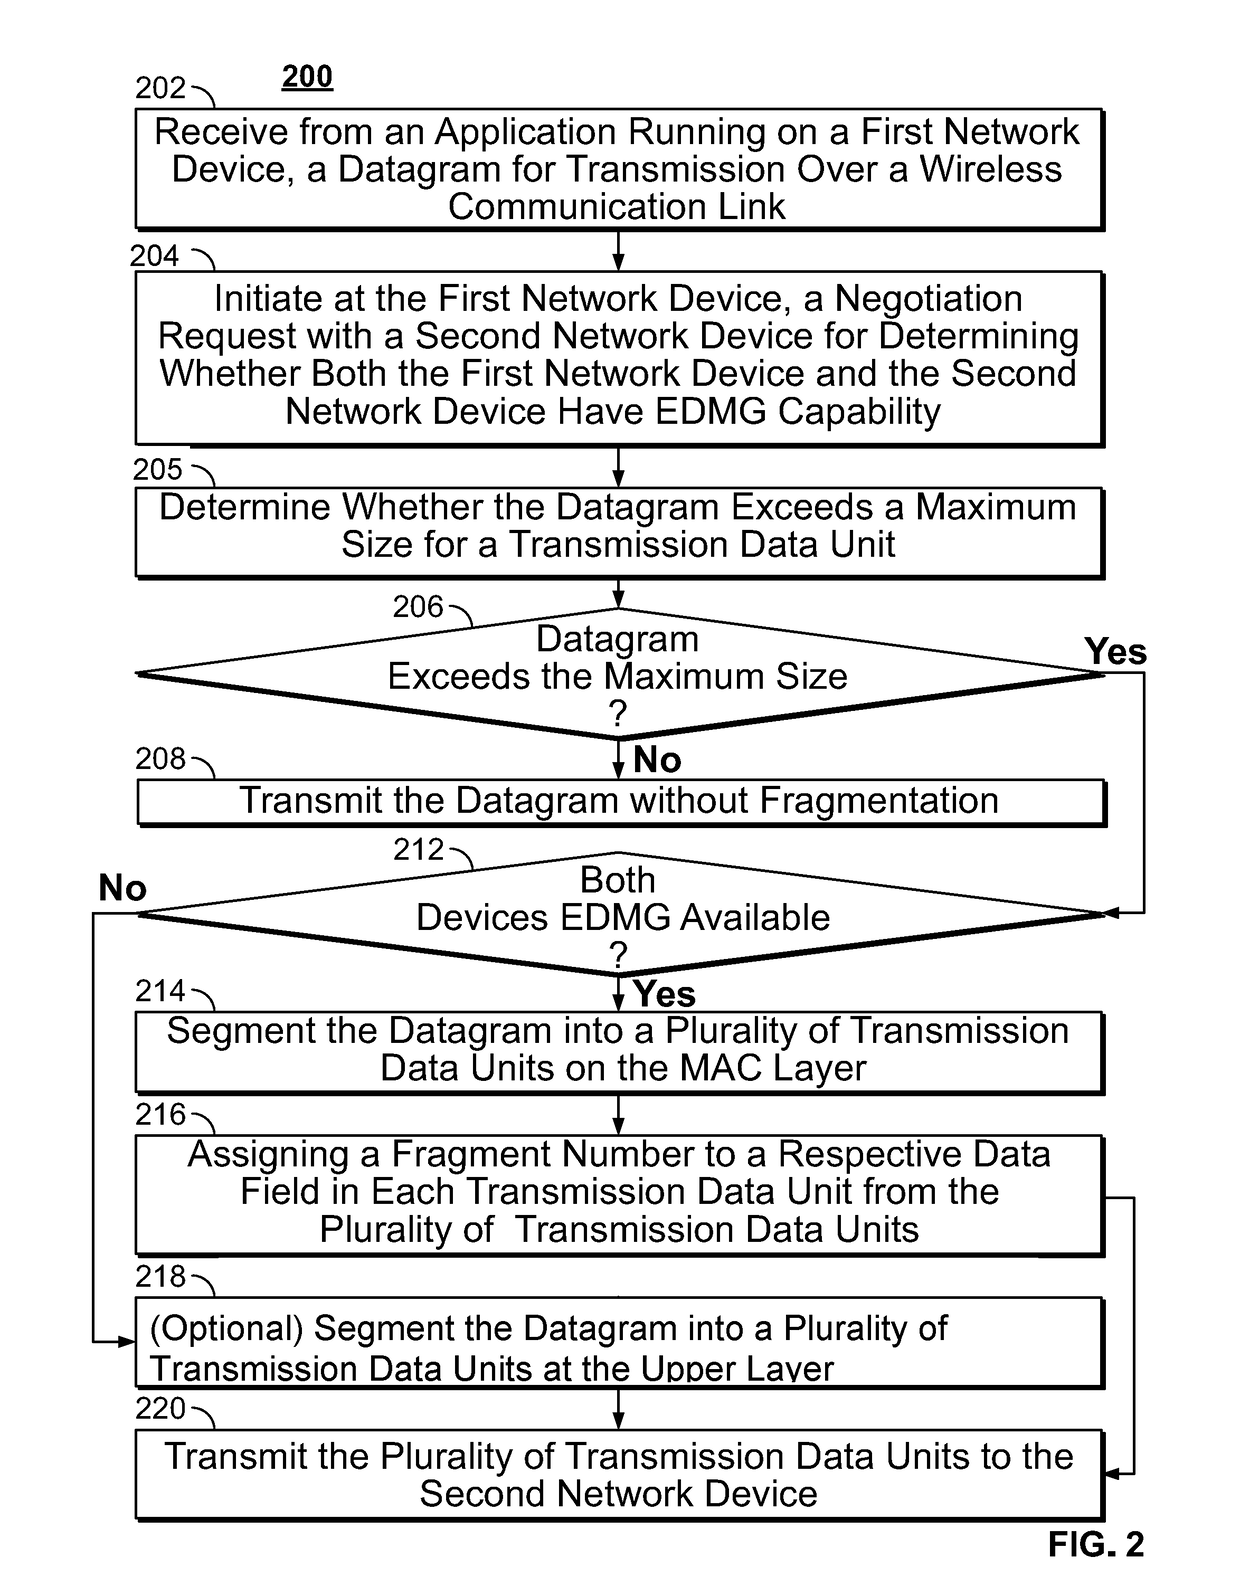 Systems and methods for segmentation and reassembly of data frames in 802.11 wireless local area networks